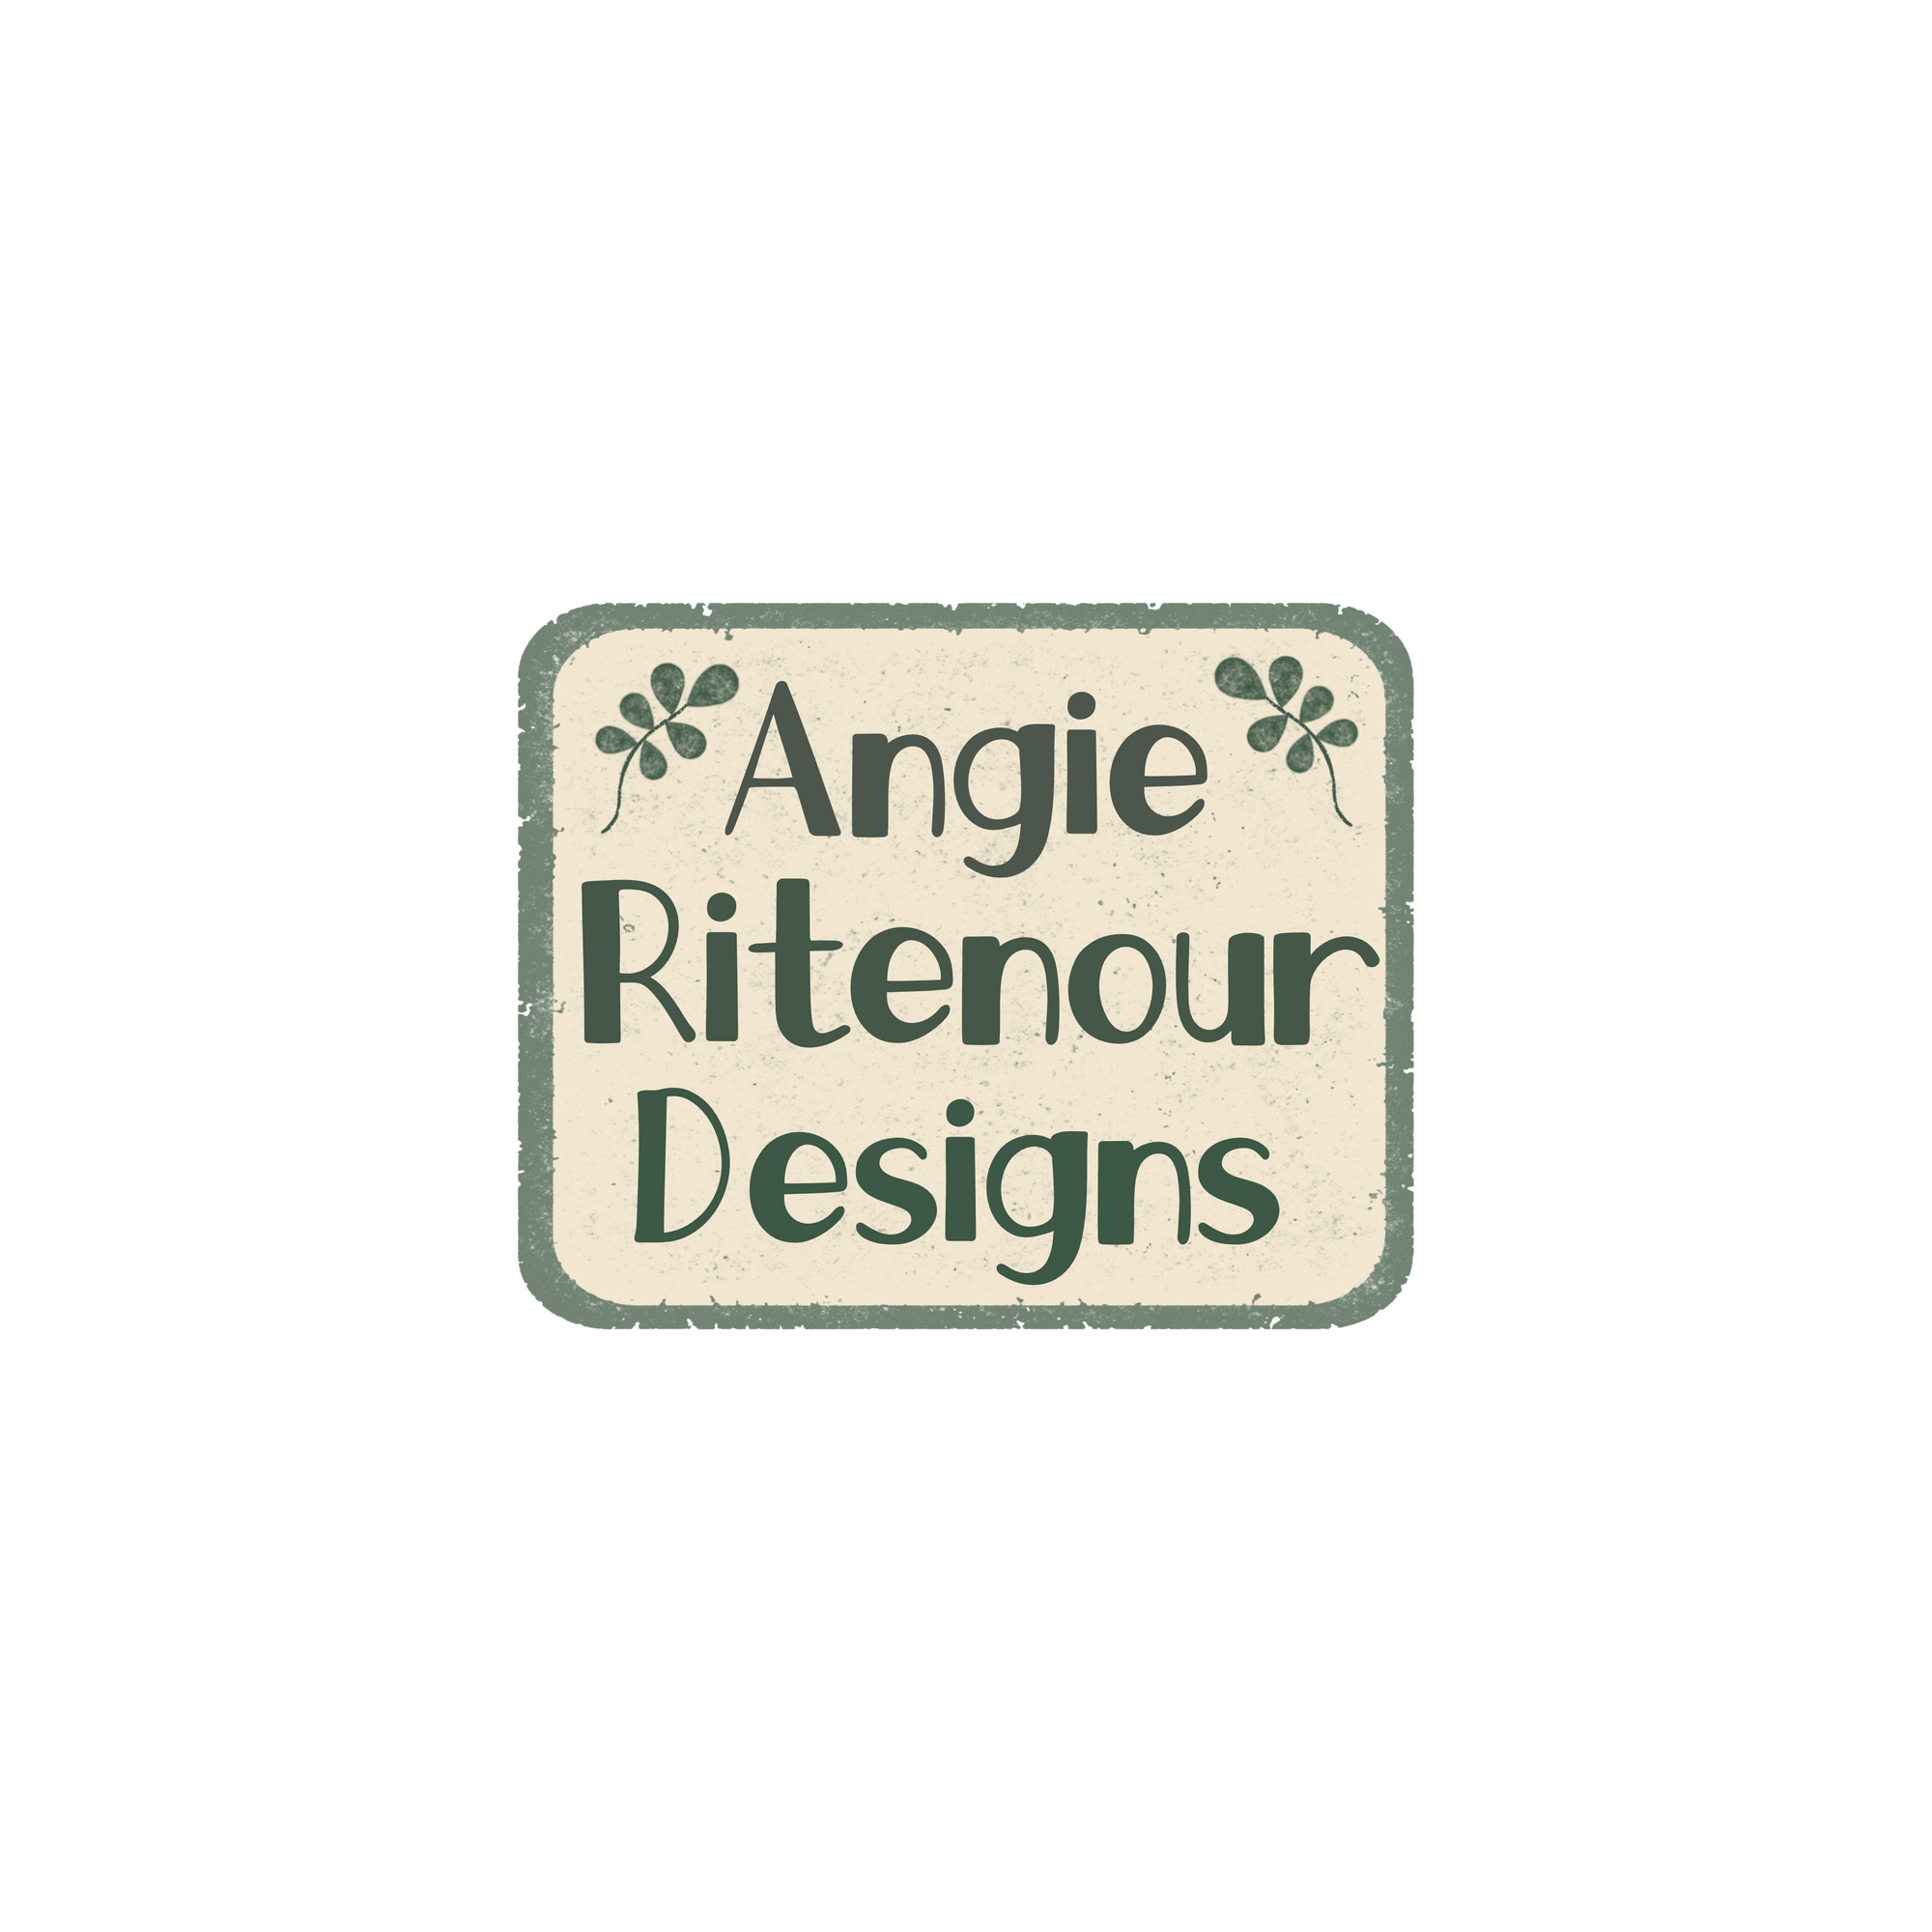 Designs by Angie Ritenour Designs